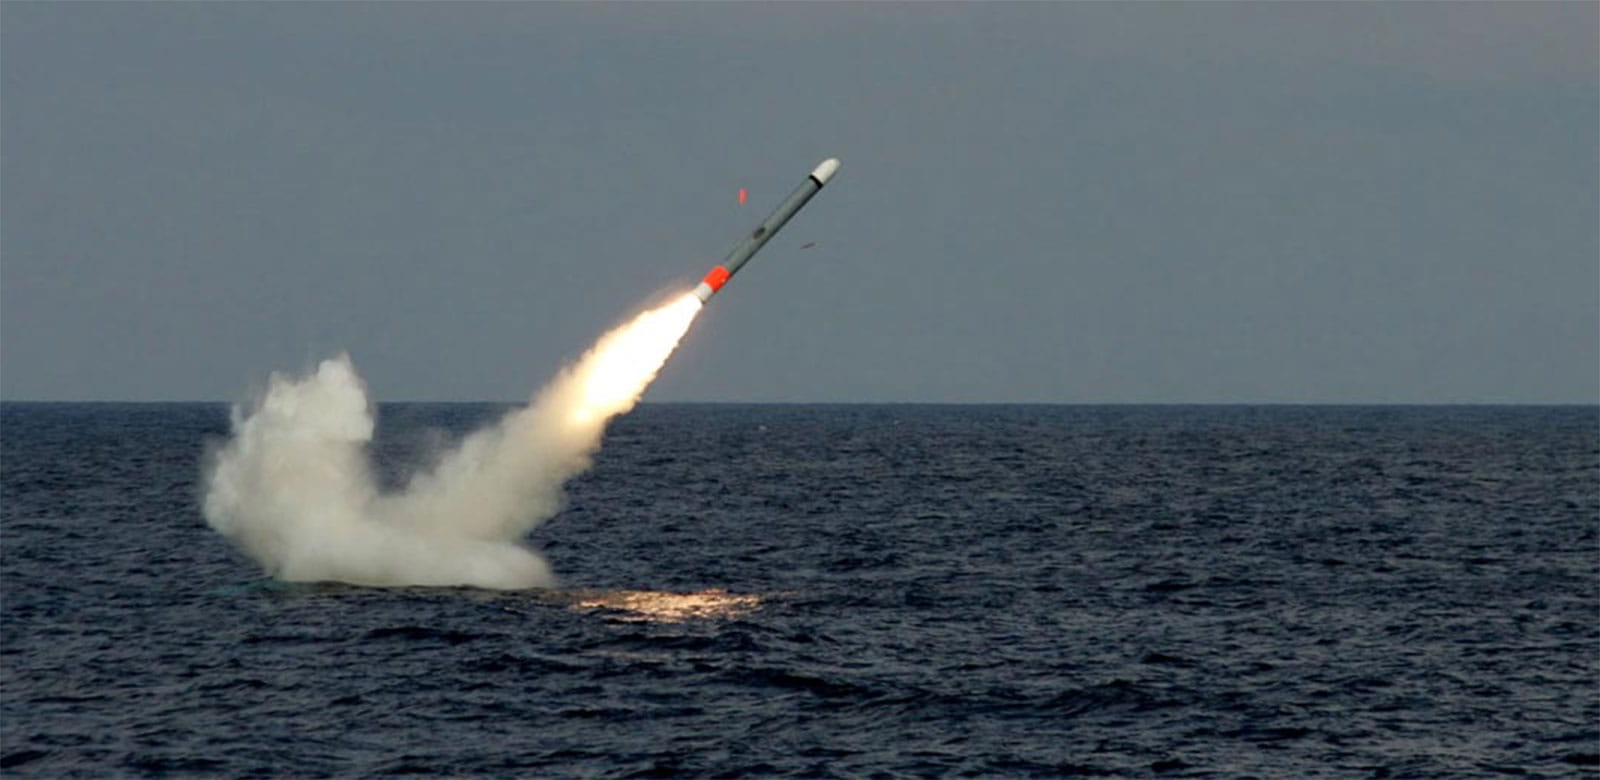 Tomahawk missile emerging from water after being launched from a submarine